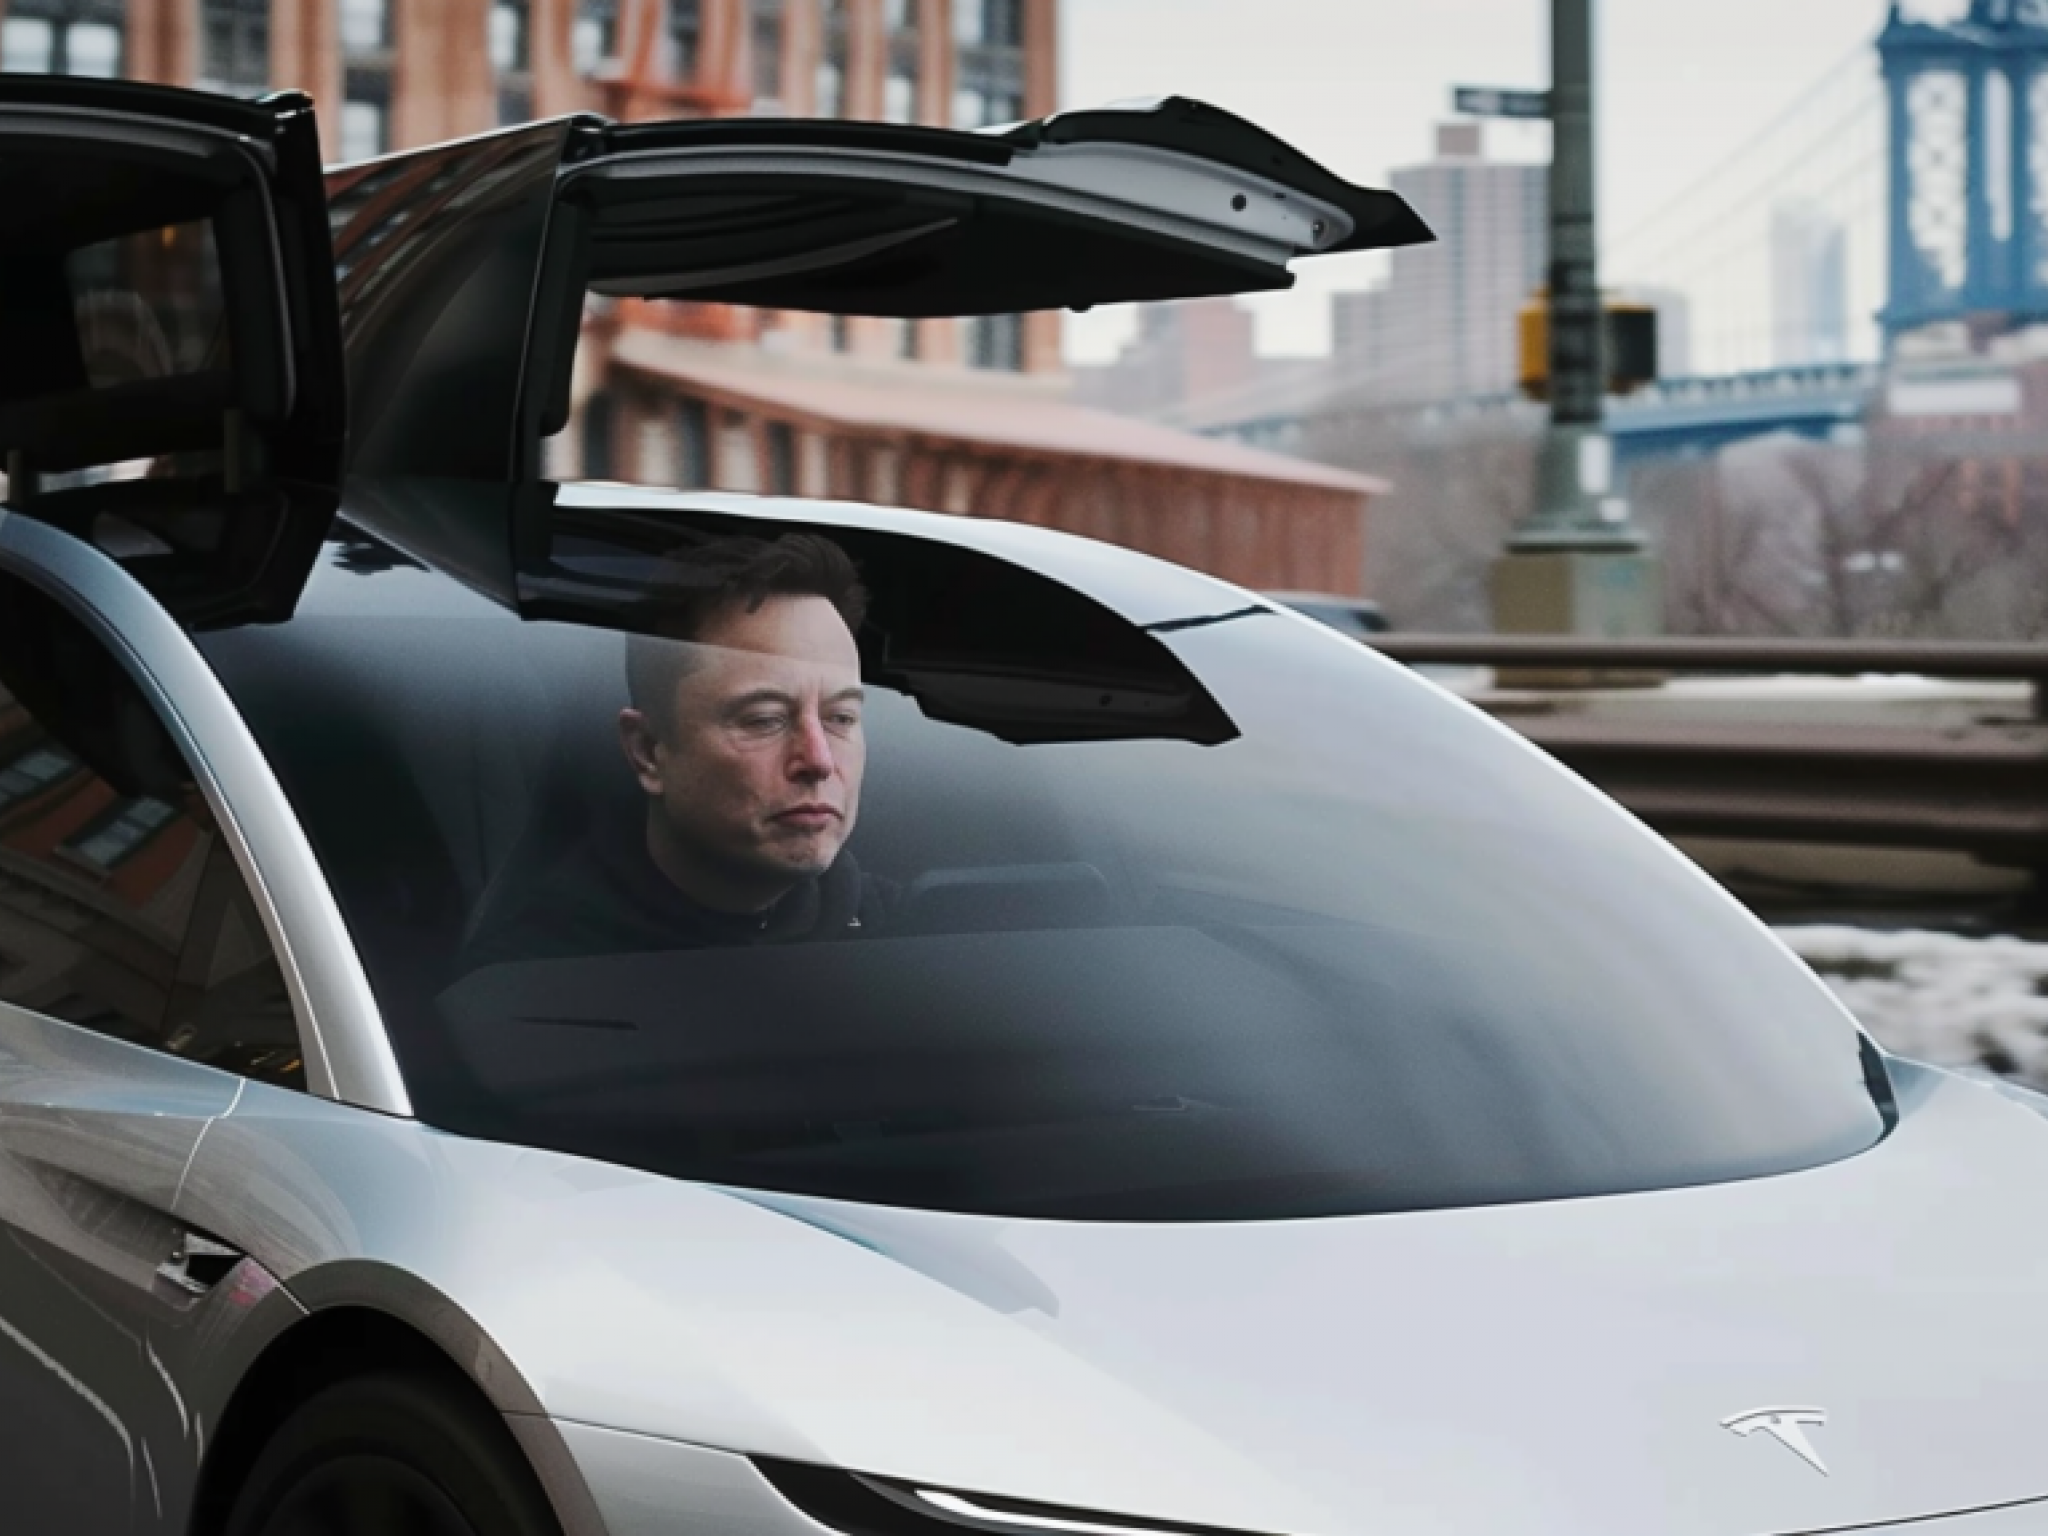  tesla-robotaxi-unveiling-set-for-oct10-here-are-the-updates-from-company-ceo-elon-musk-on-its-upcoming-product 